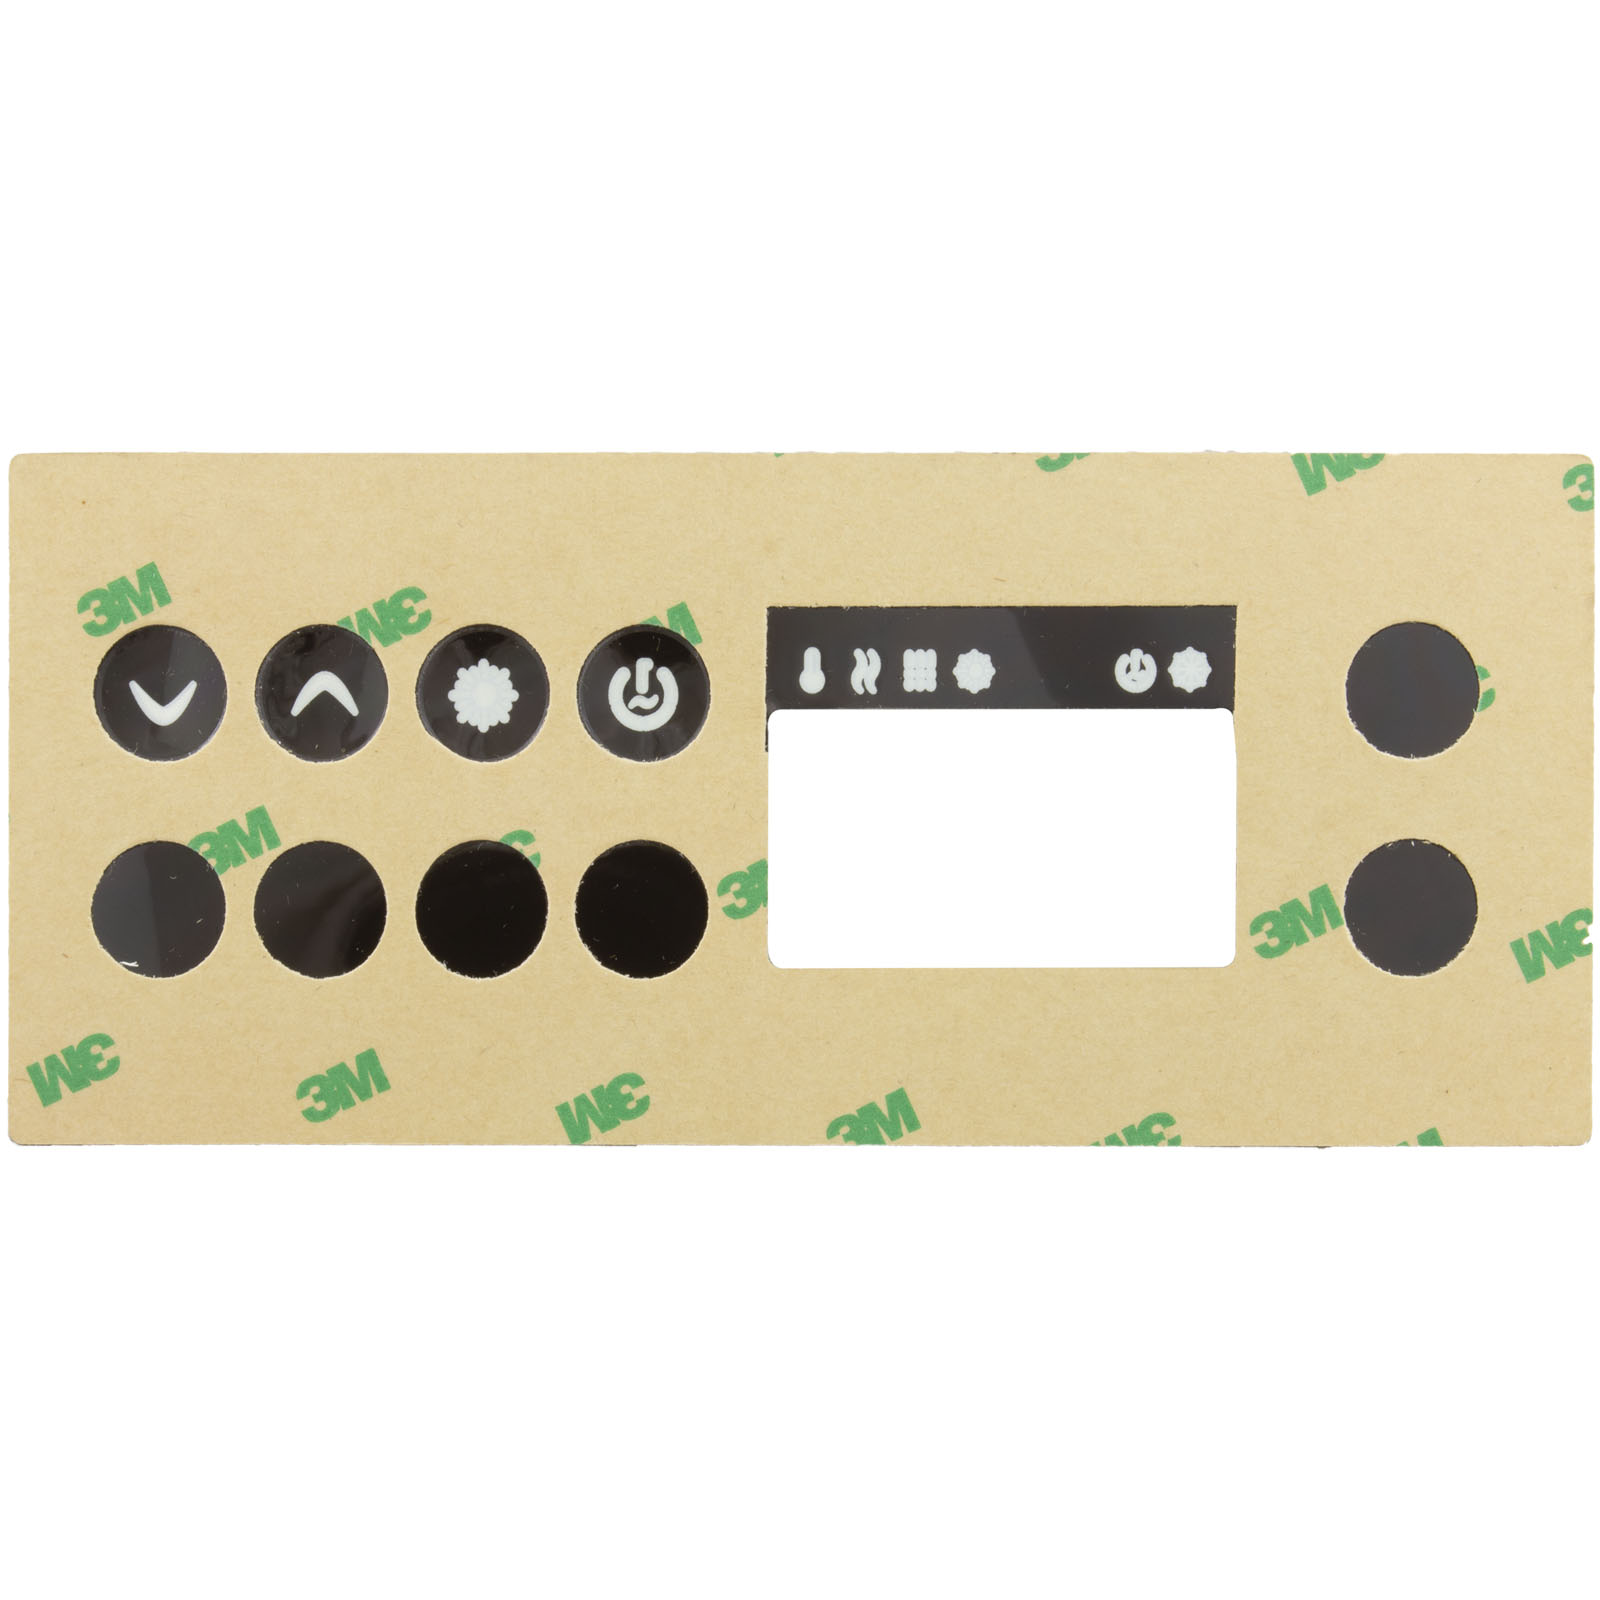 Picture of 9916-101205 Overlay Gecko K-19 AE 4 Button P1 Lt